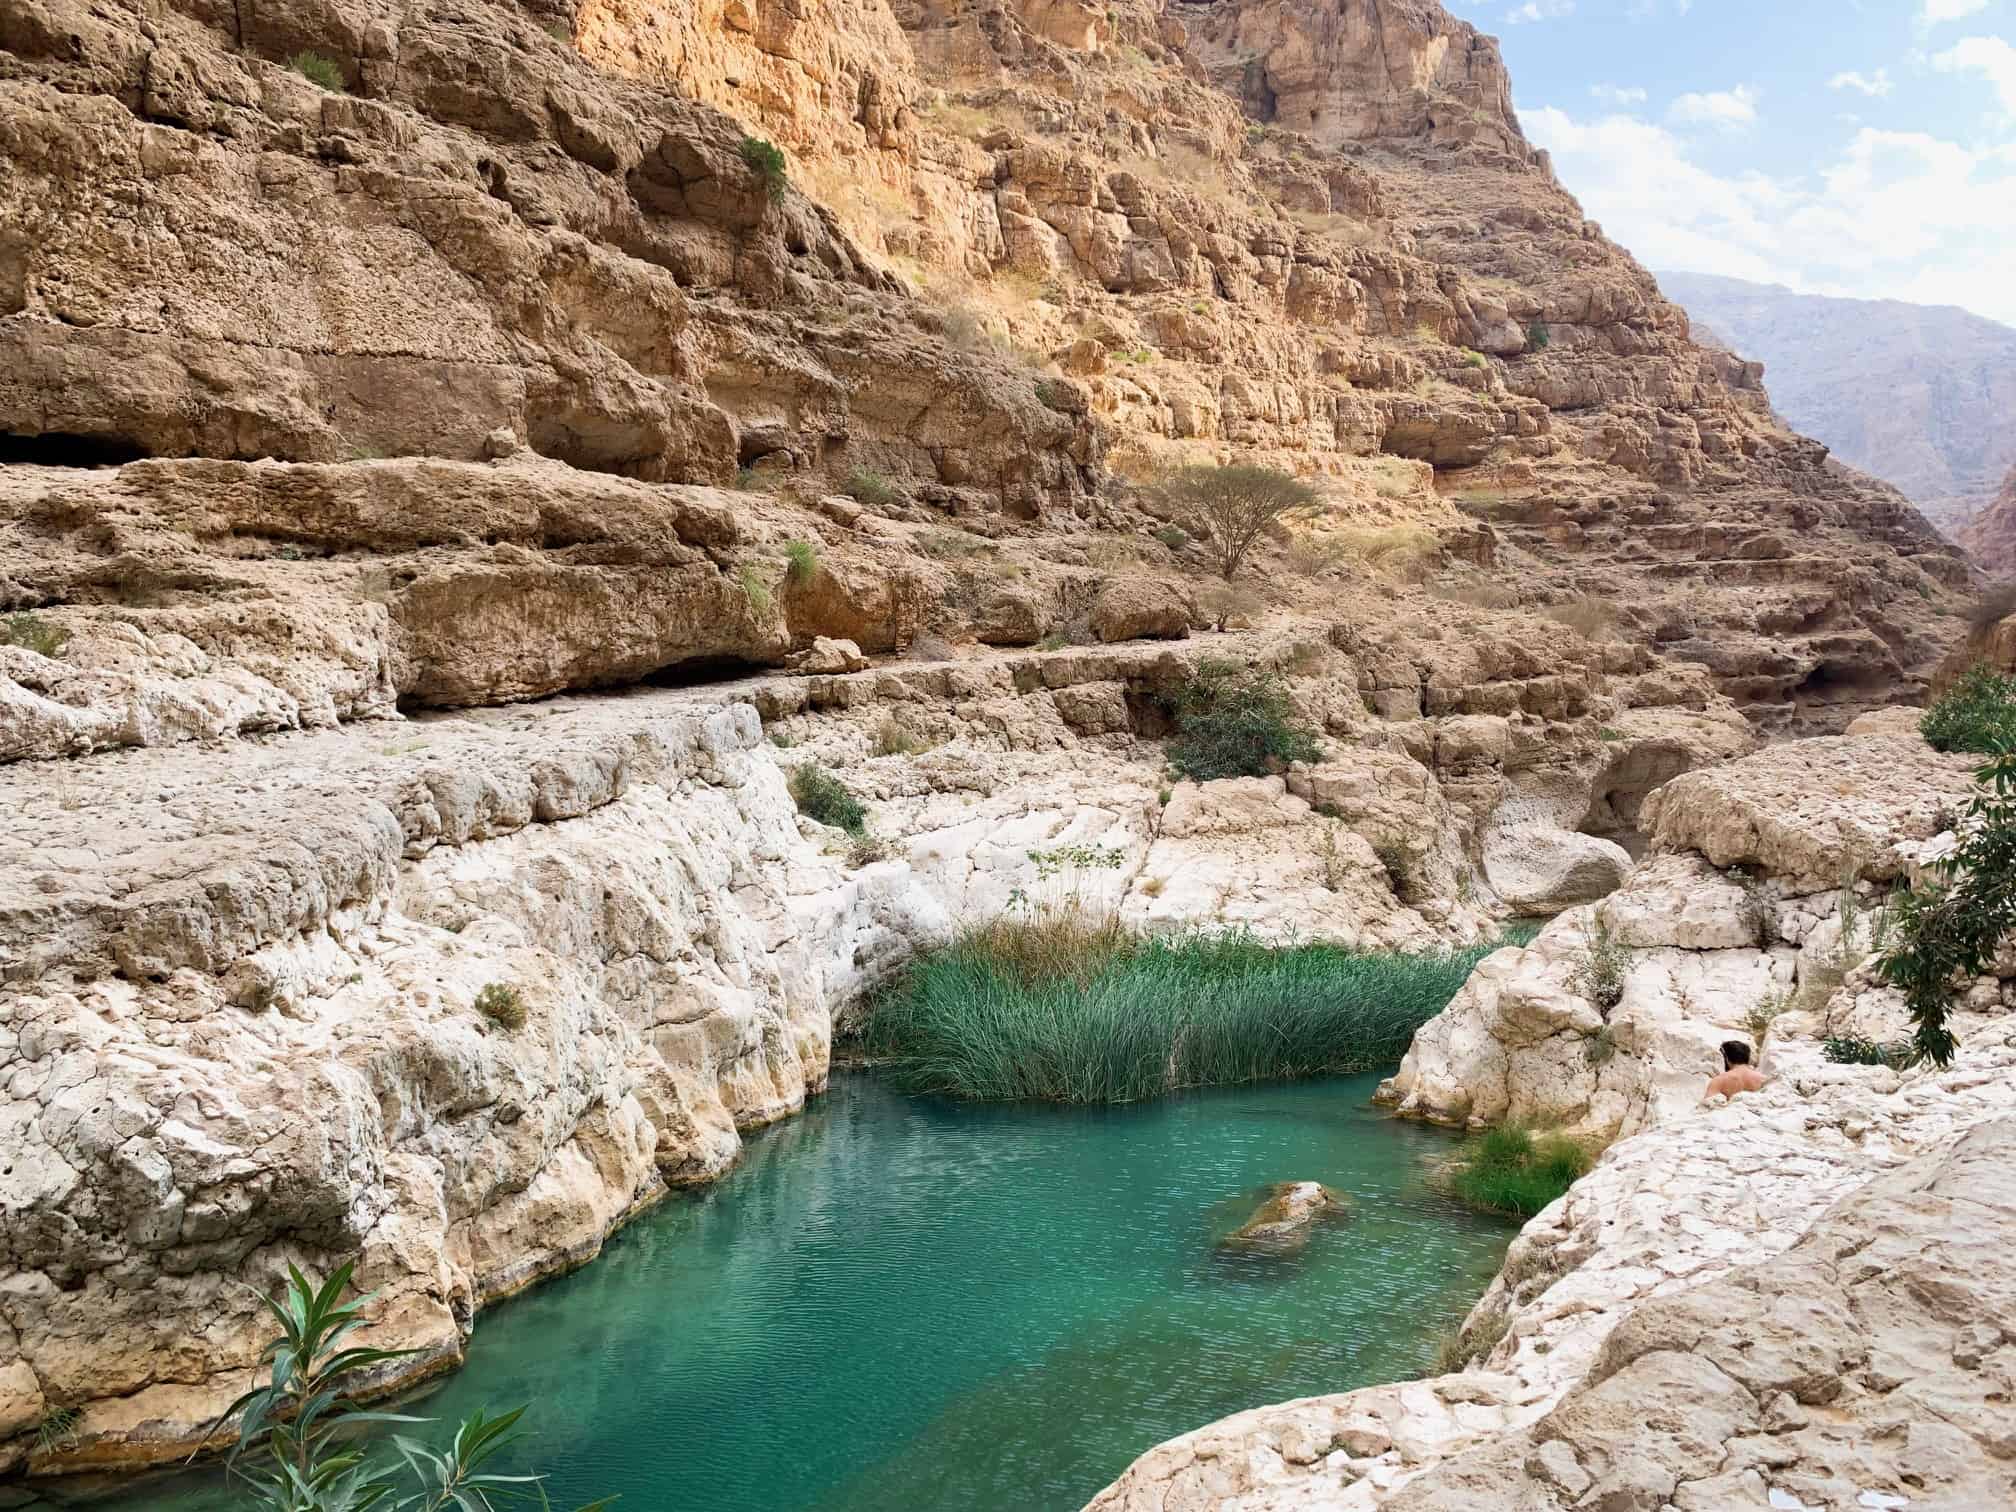 Swimming in the blue pools of Wadi Shab is one of the best things to do in Oman